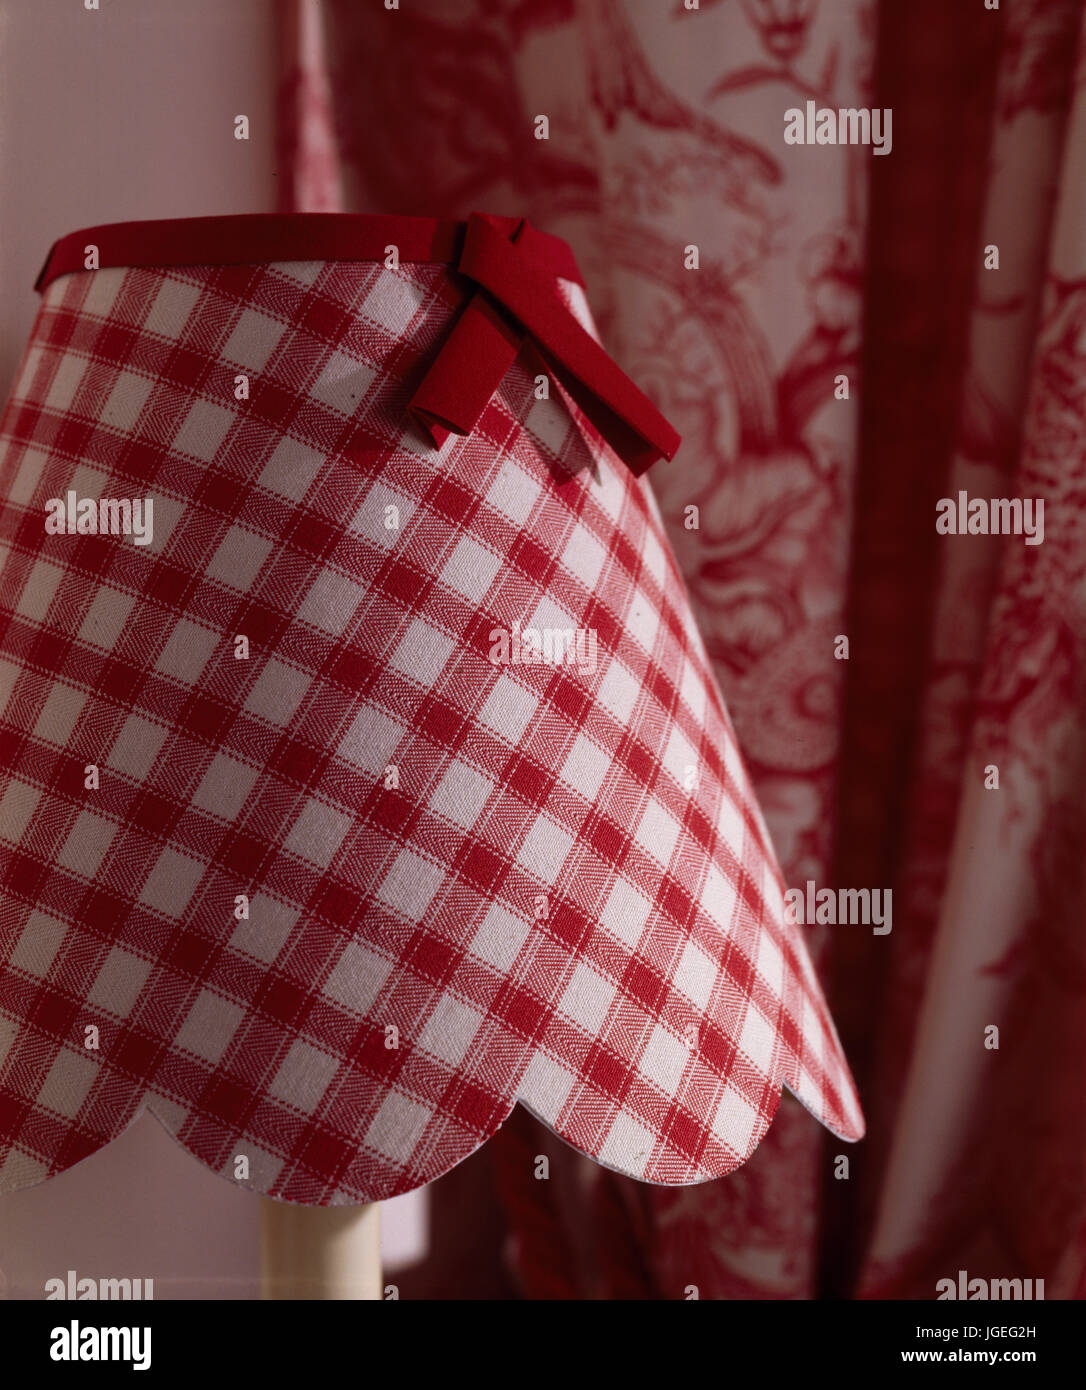 Closeup of red gingham check lamp shade with red bow trim Stock Photo